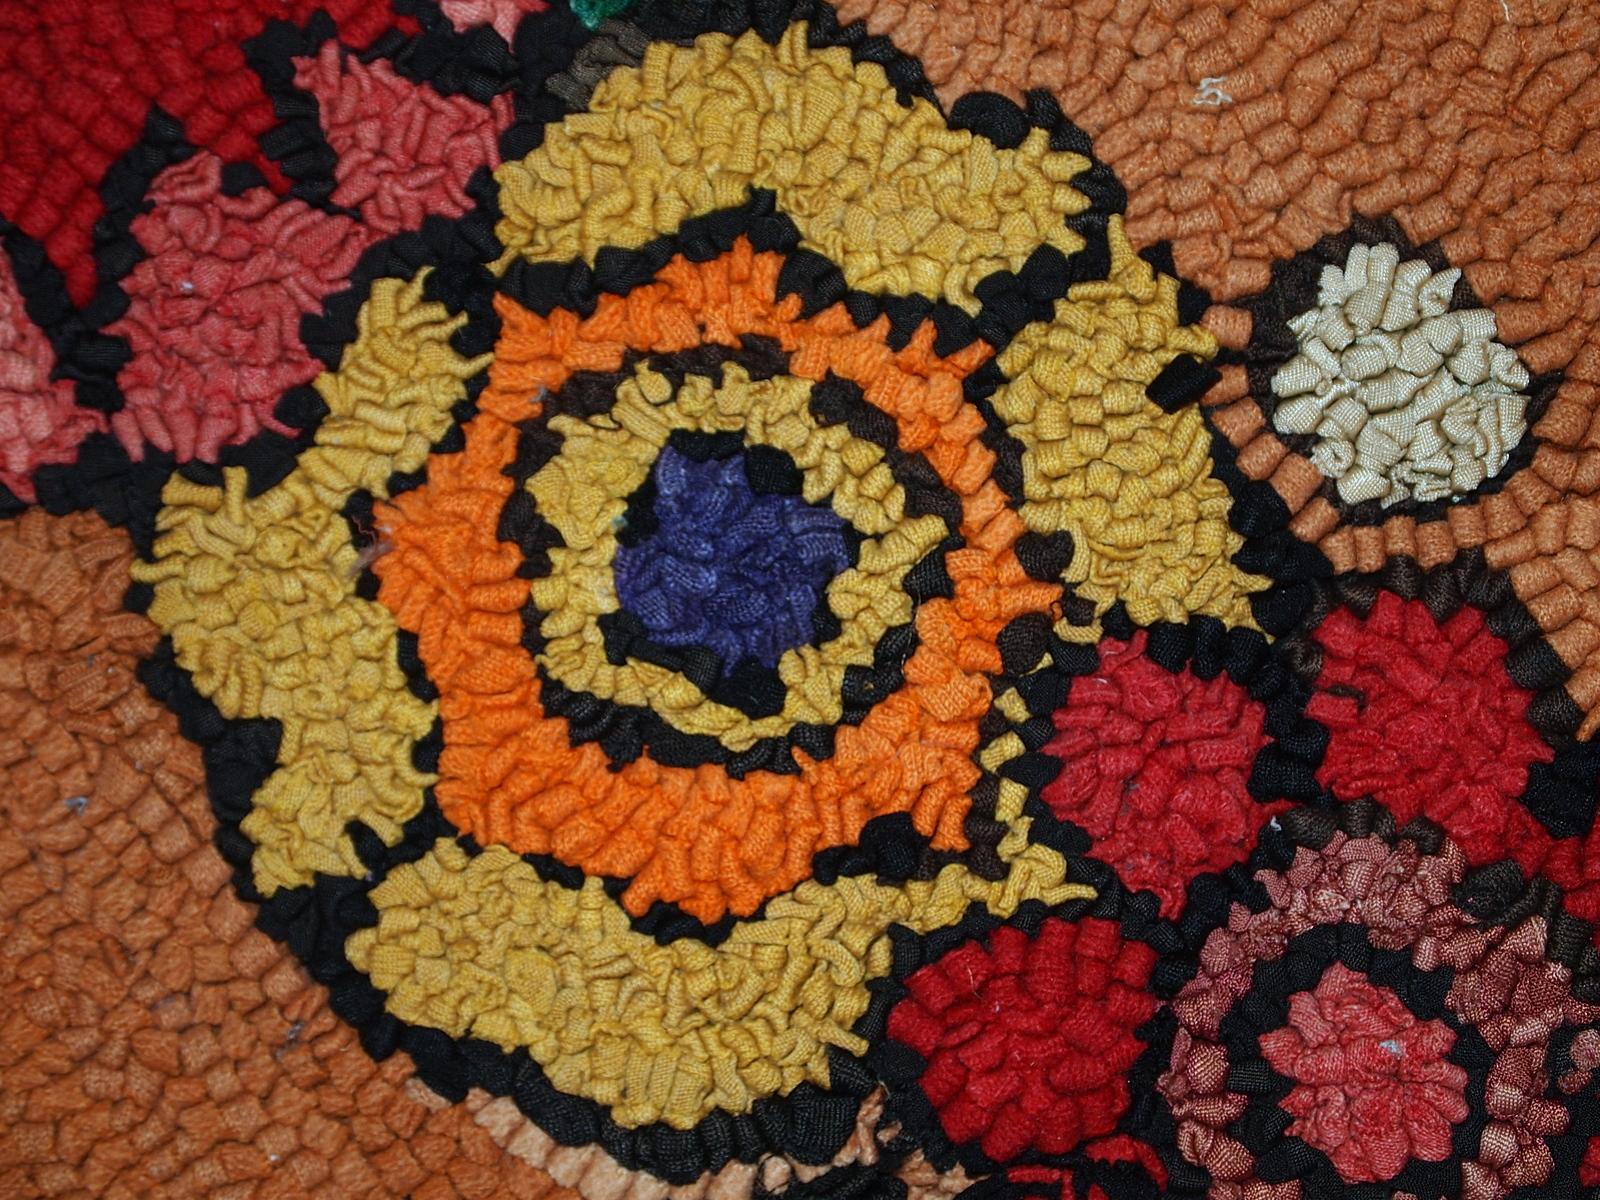 Vintage American hooked rug in bright orange colour. Very beautiful piece of American art in original good condition.

-condition: original good,

-circa: 1940s,

-size: 2' x 3' ( 61cm x 91cm ),

-material: wool,

-country of origin: